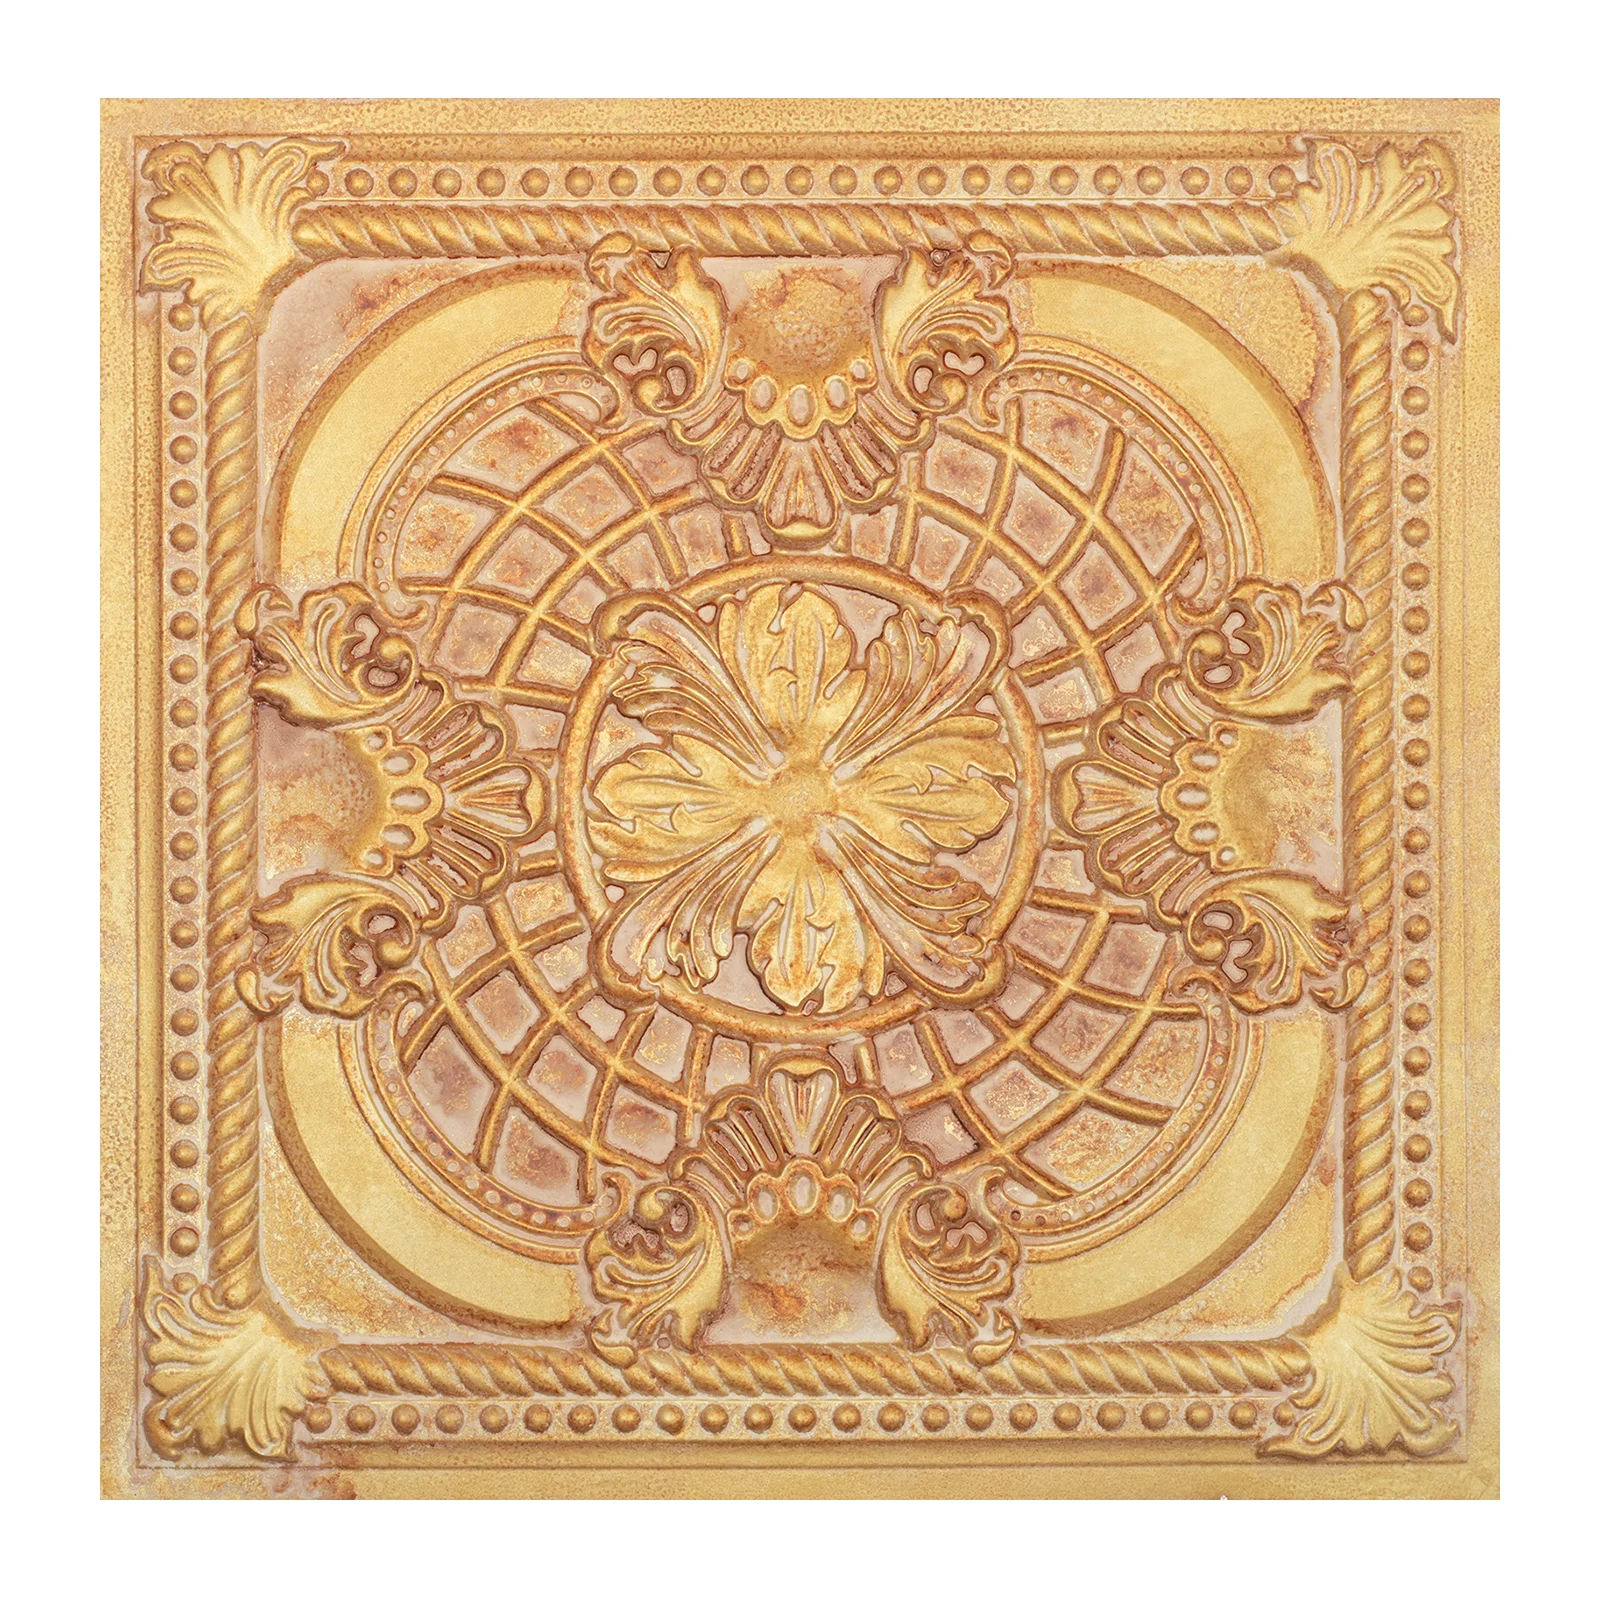 Faux painting Auld Glue up ceiling tiles Metalize wall panels Easy to Install PVC Panels PL31 Vintage brown gold